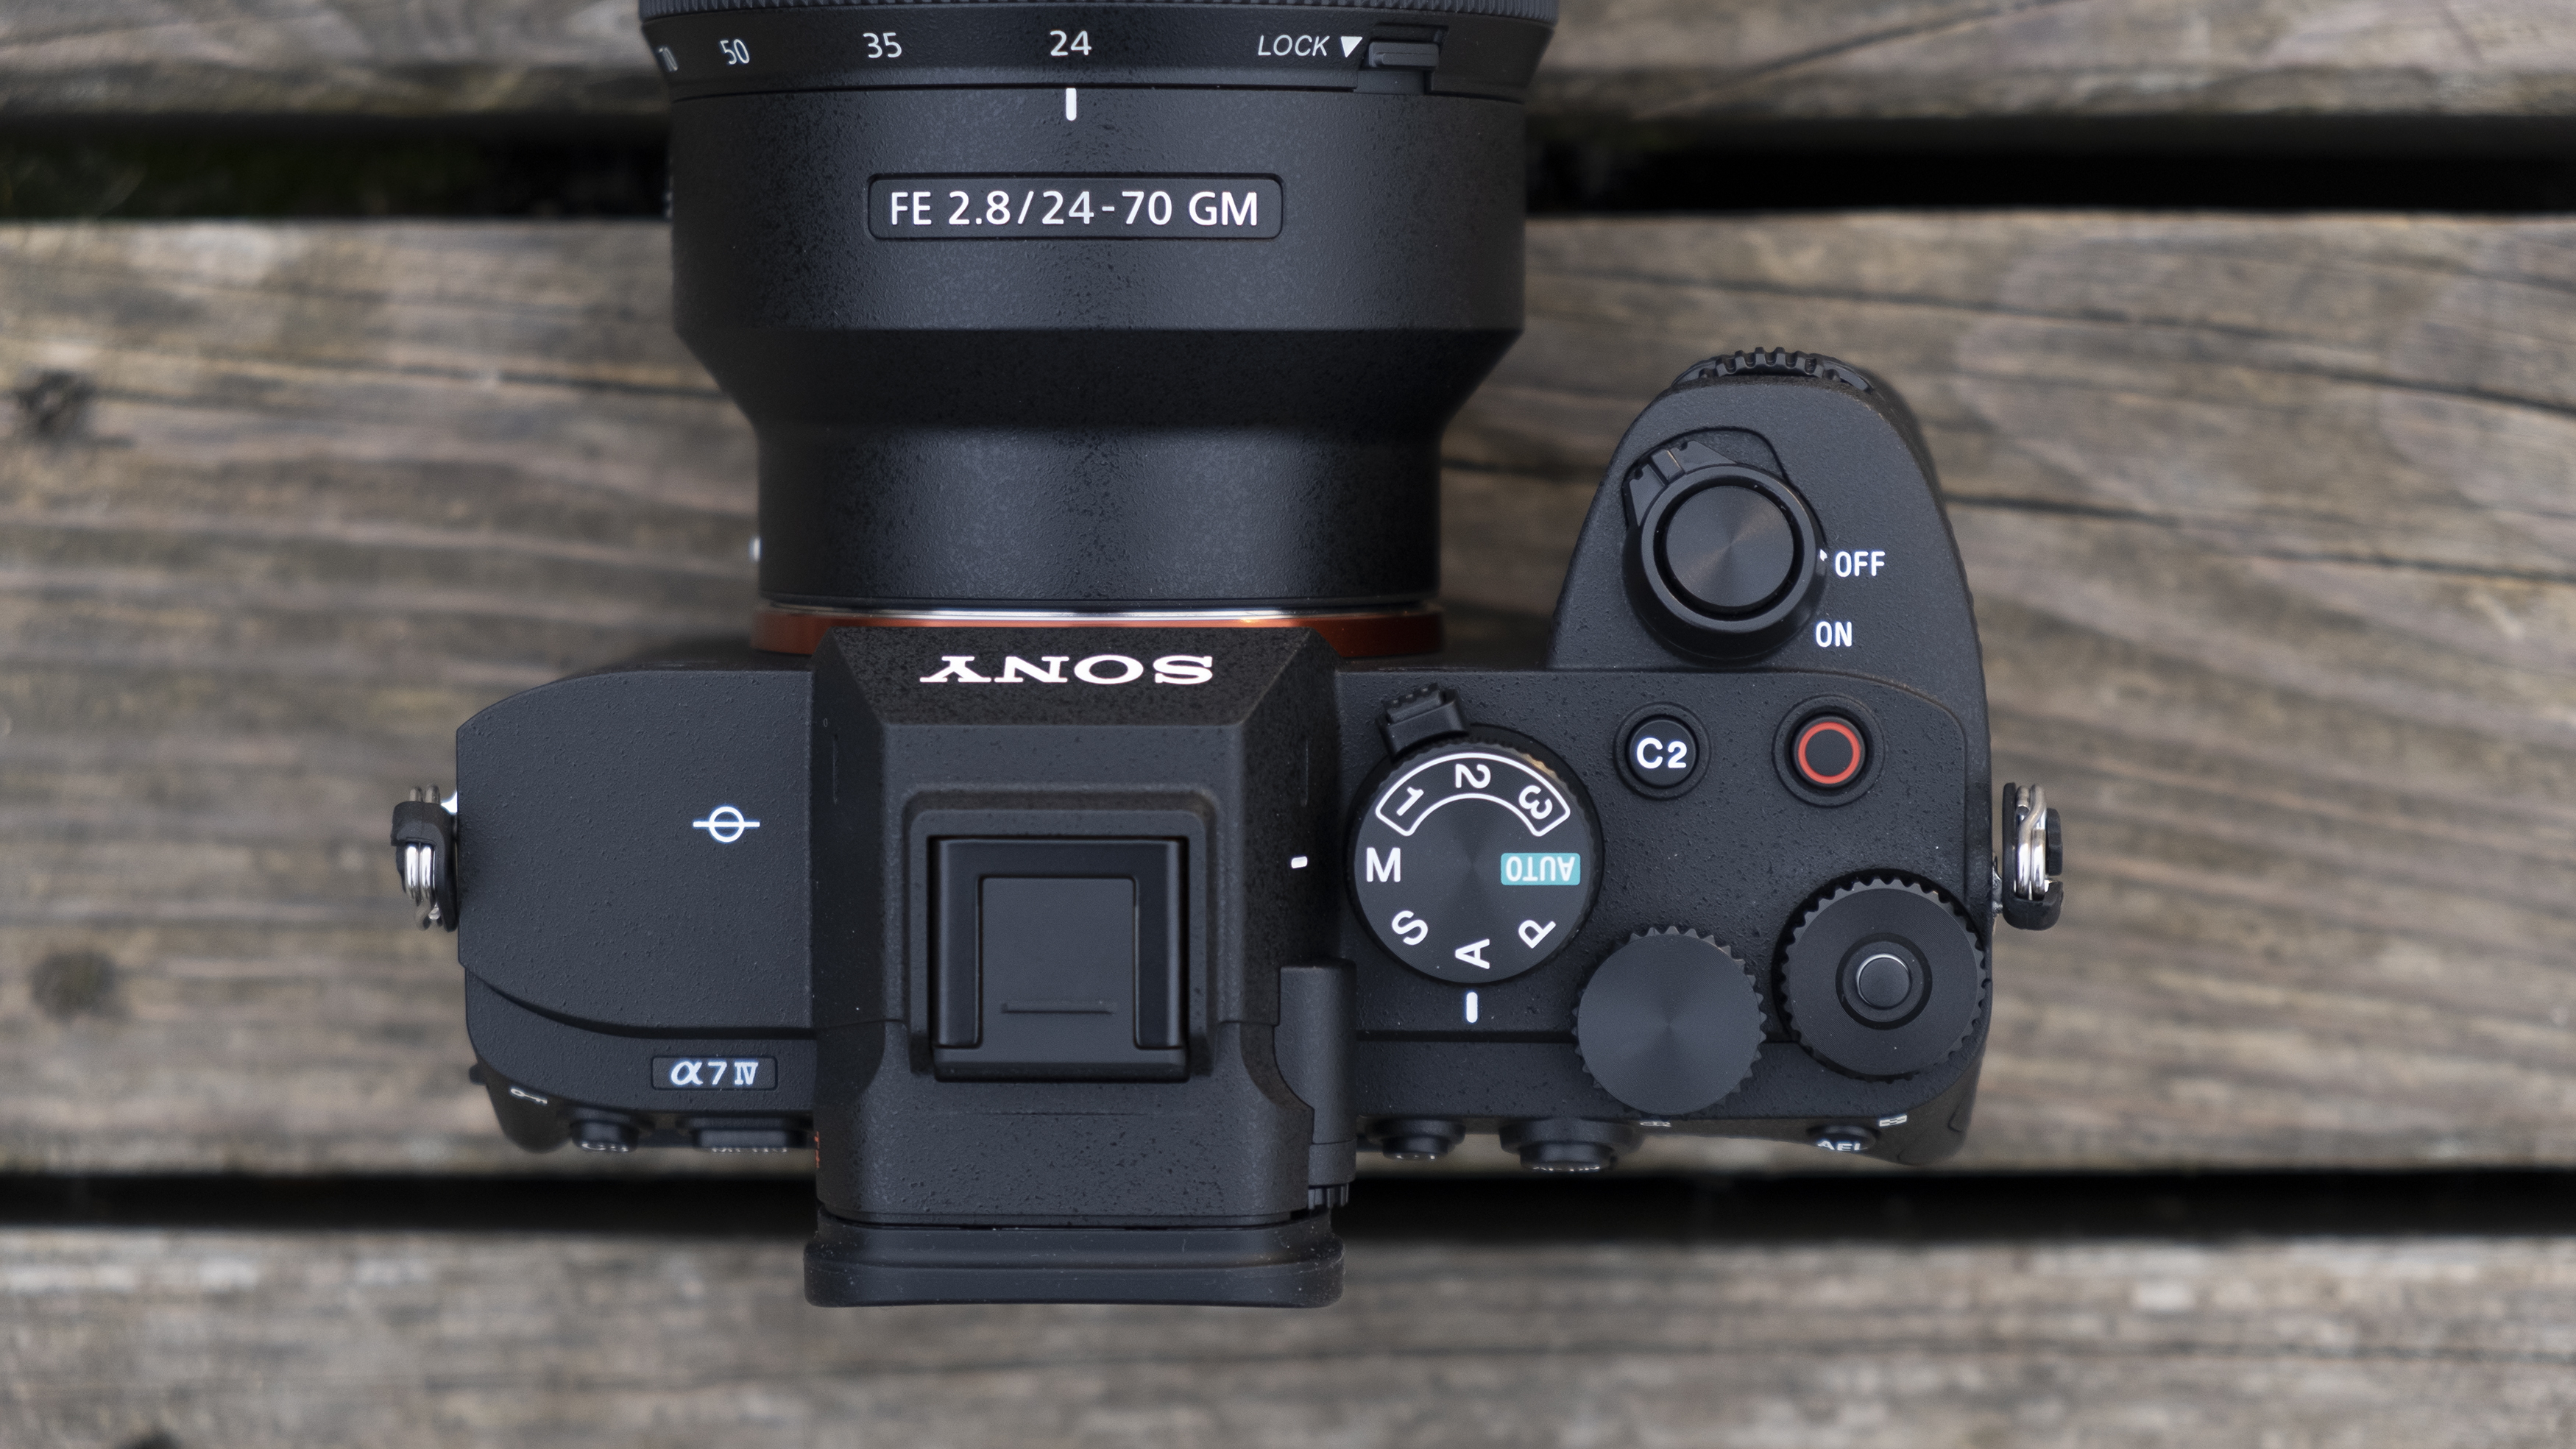 The top plate of the Sony A7 IV camera